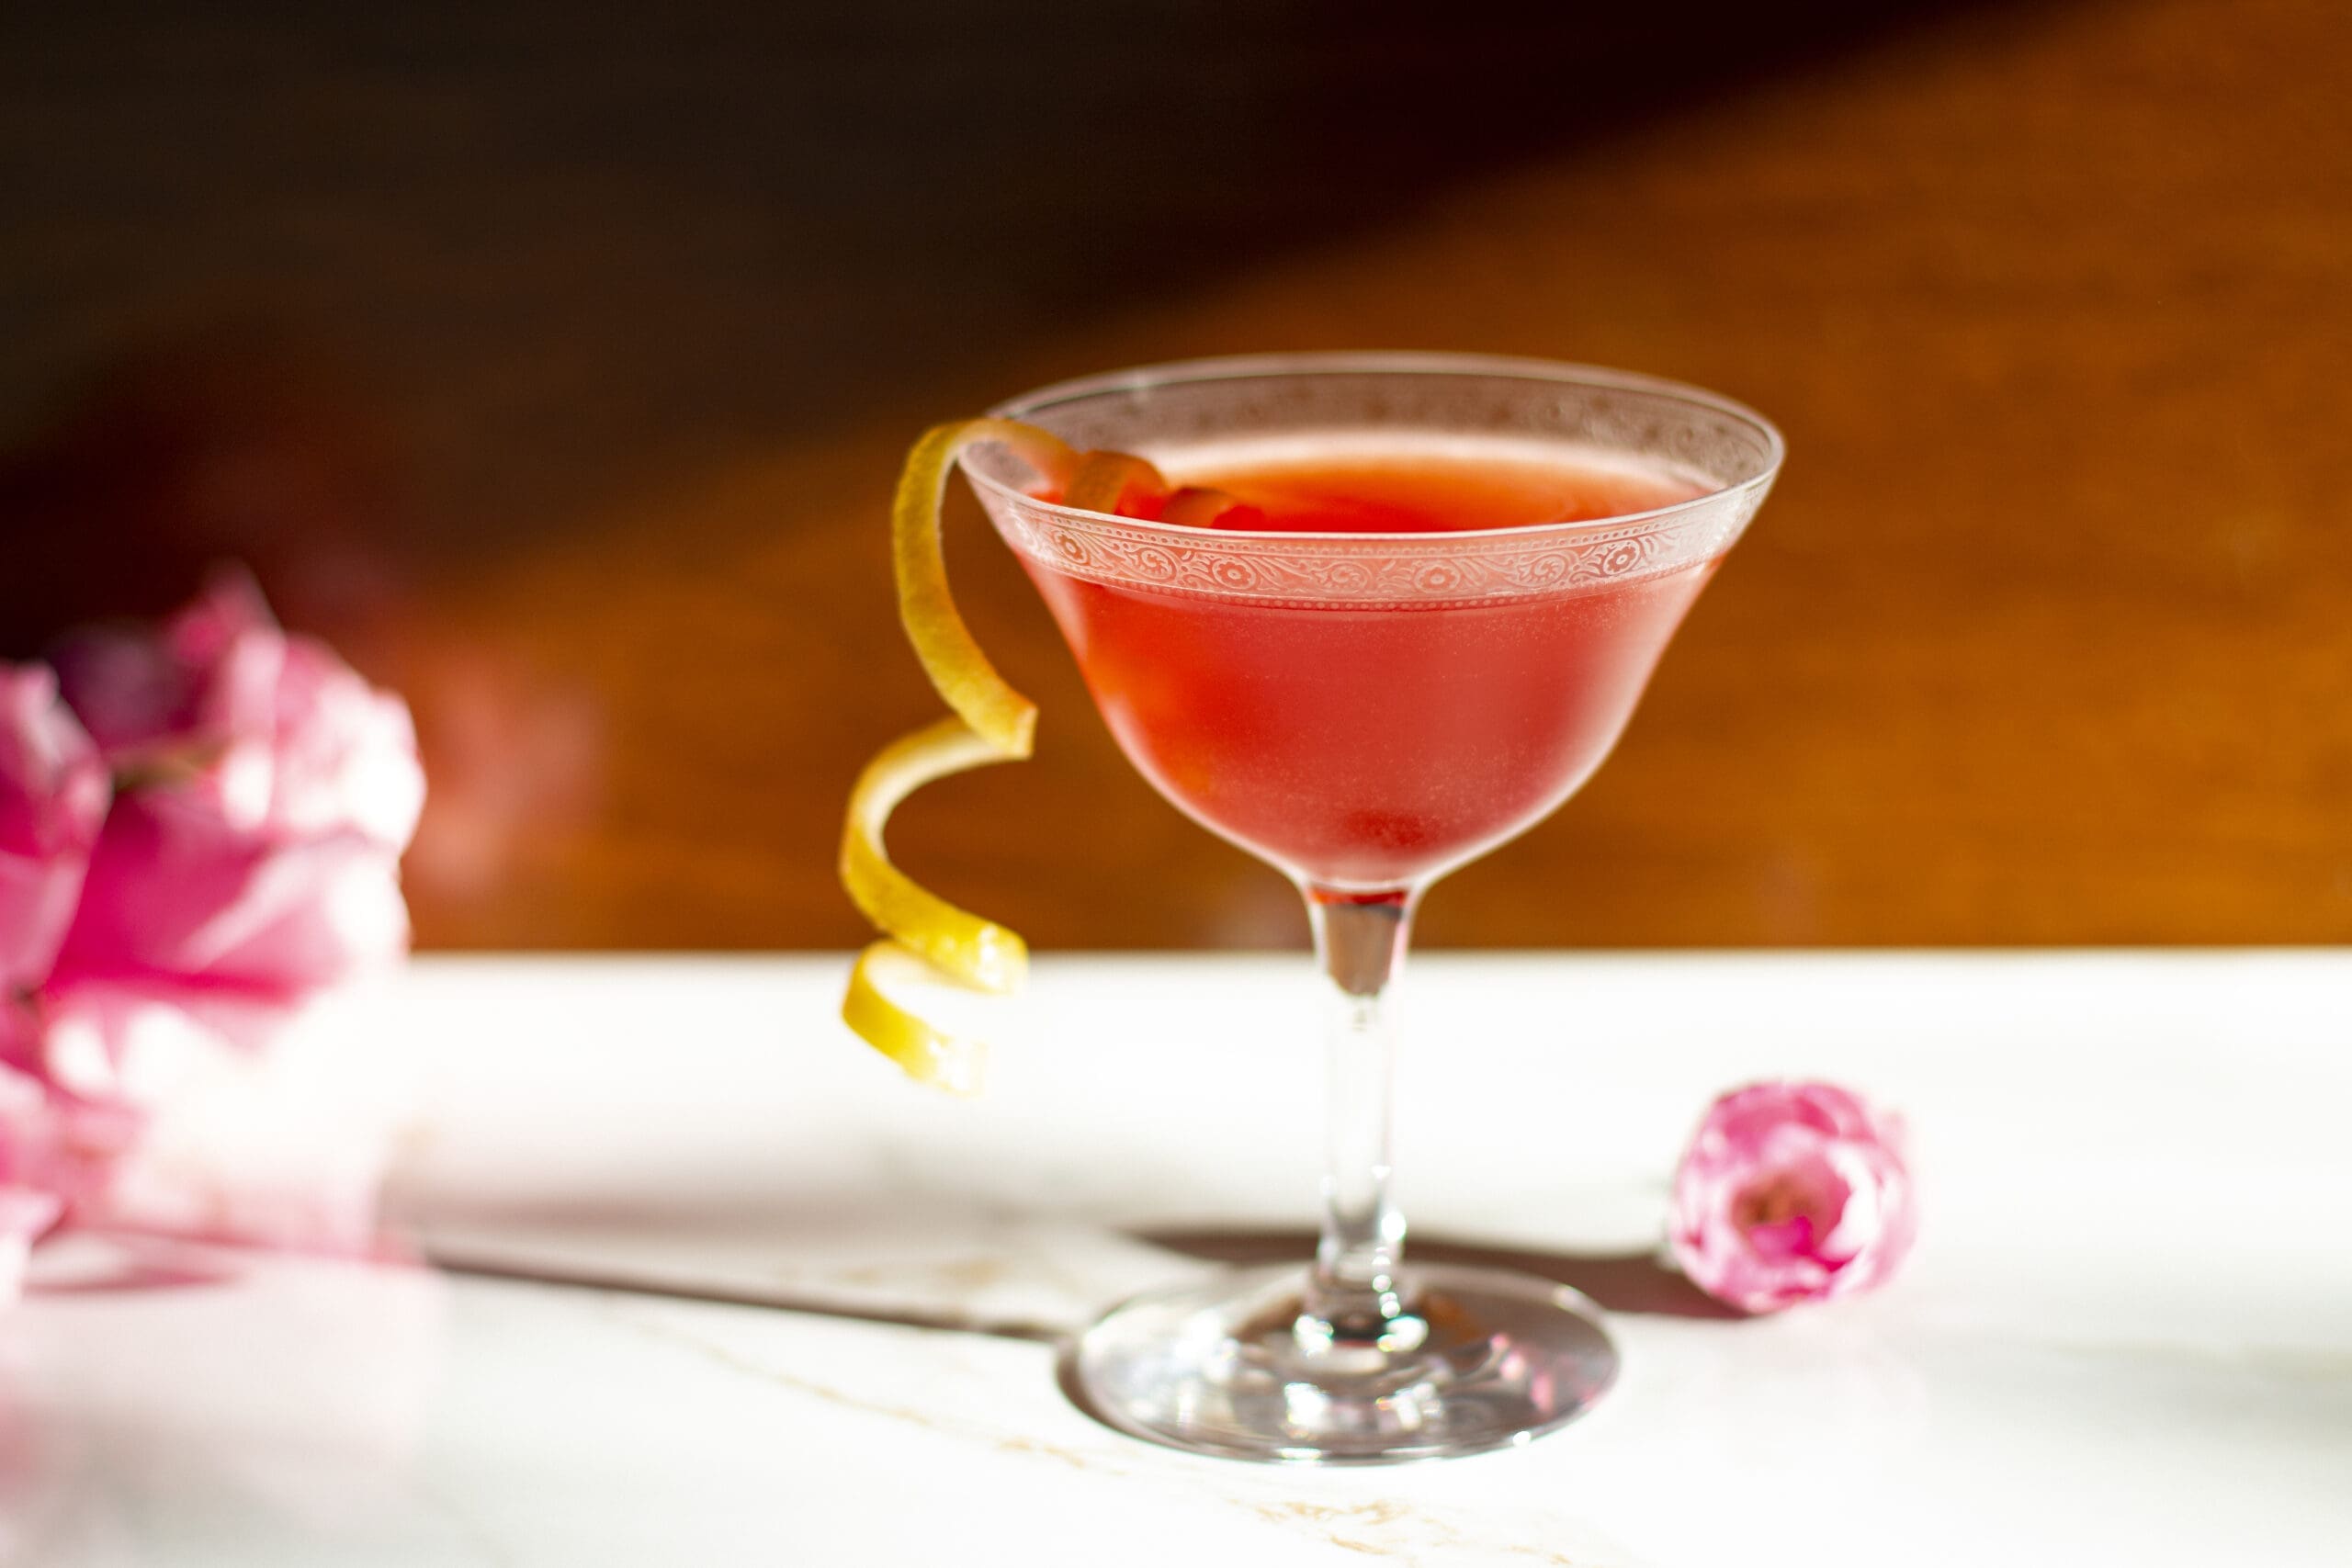 Bitter Roses, an Exquisite and Vibrant Cocktail Recipe